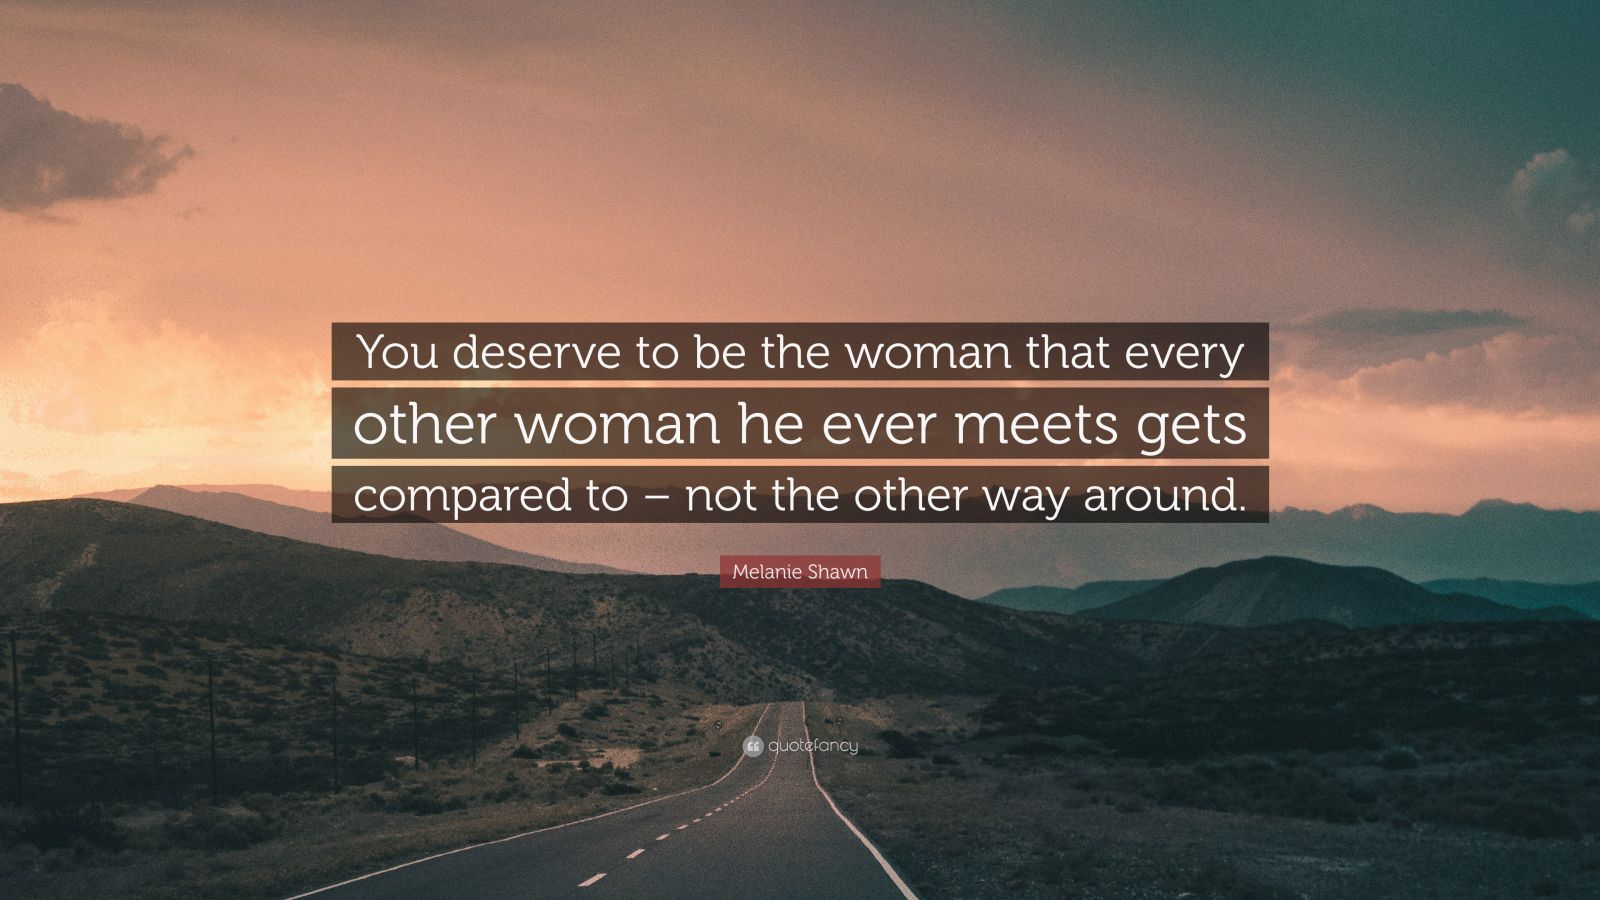 Melanie Shawn Quote: “You deserve to be the woman that every other ...